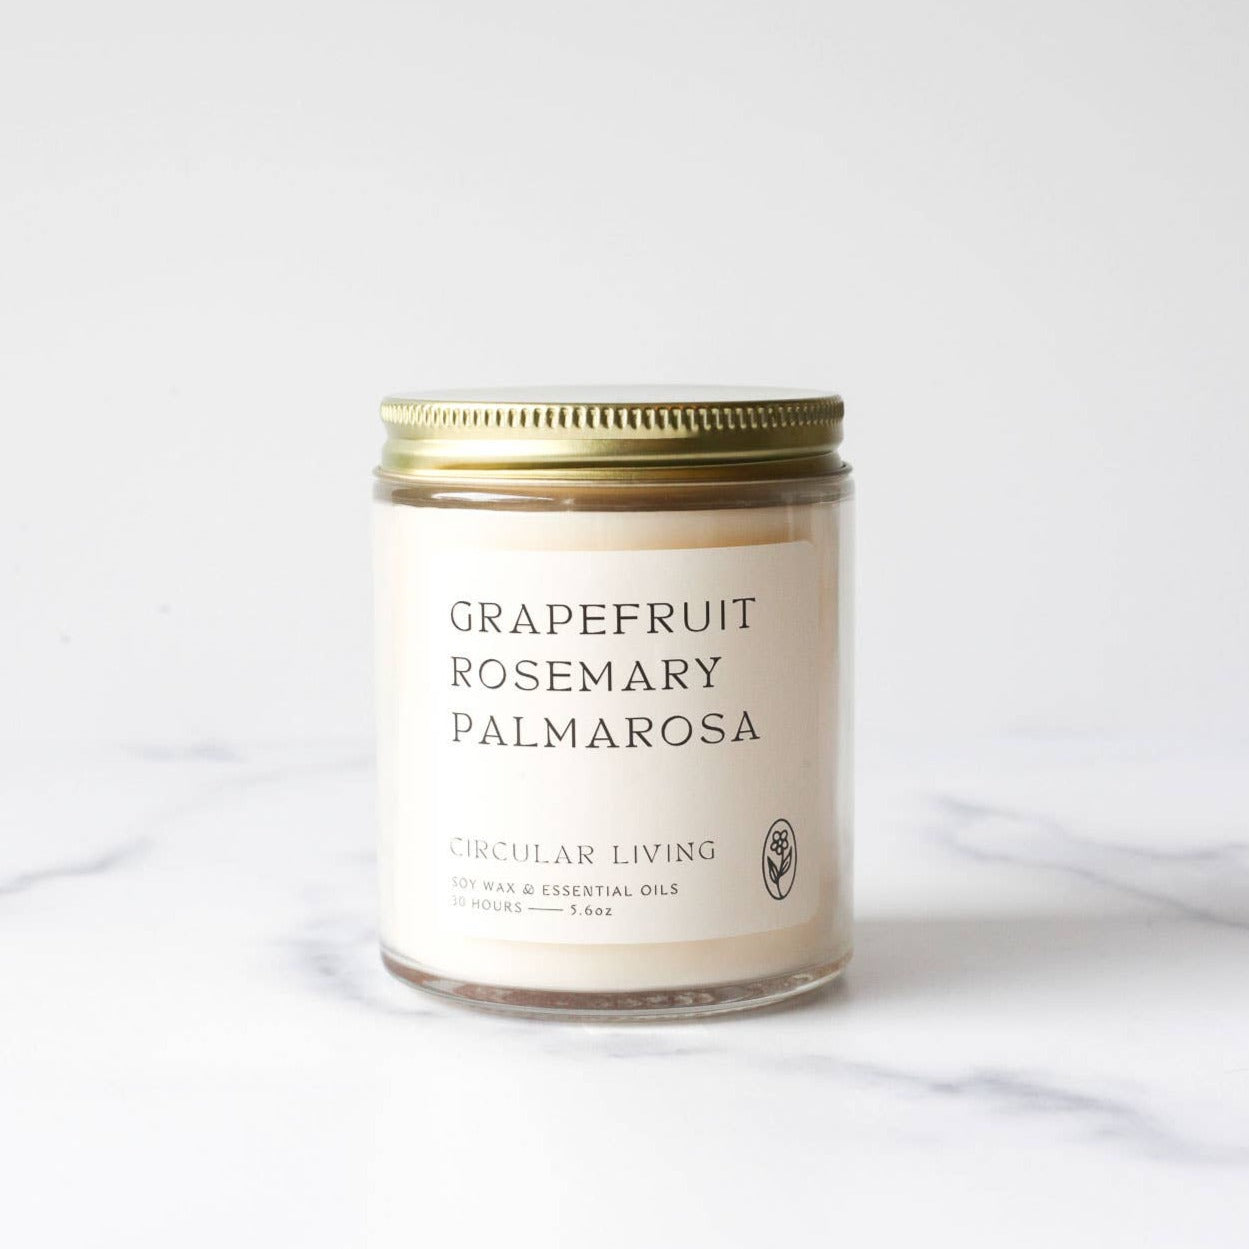 grapefruit rosemary palmarosa essential oil candle in glass